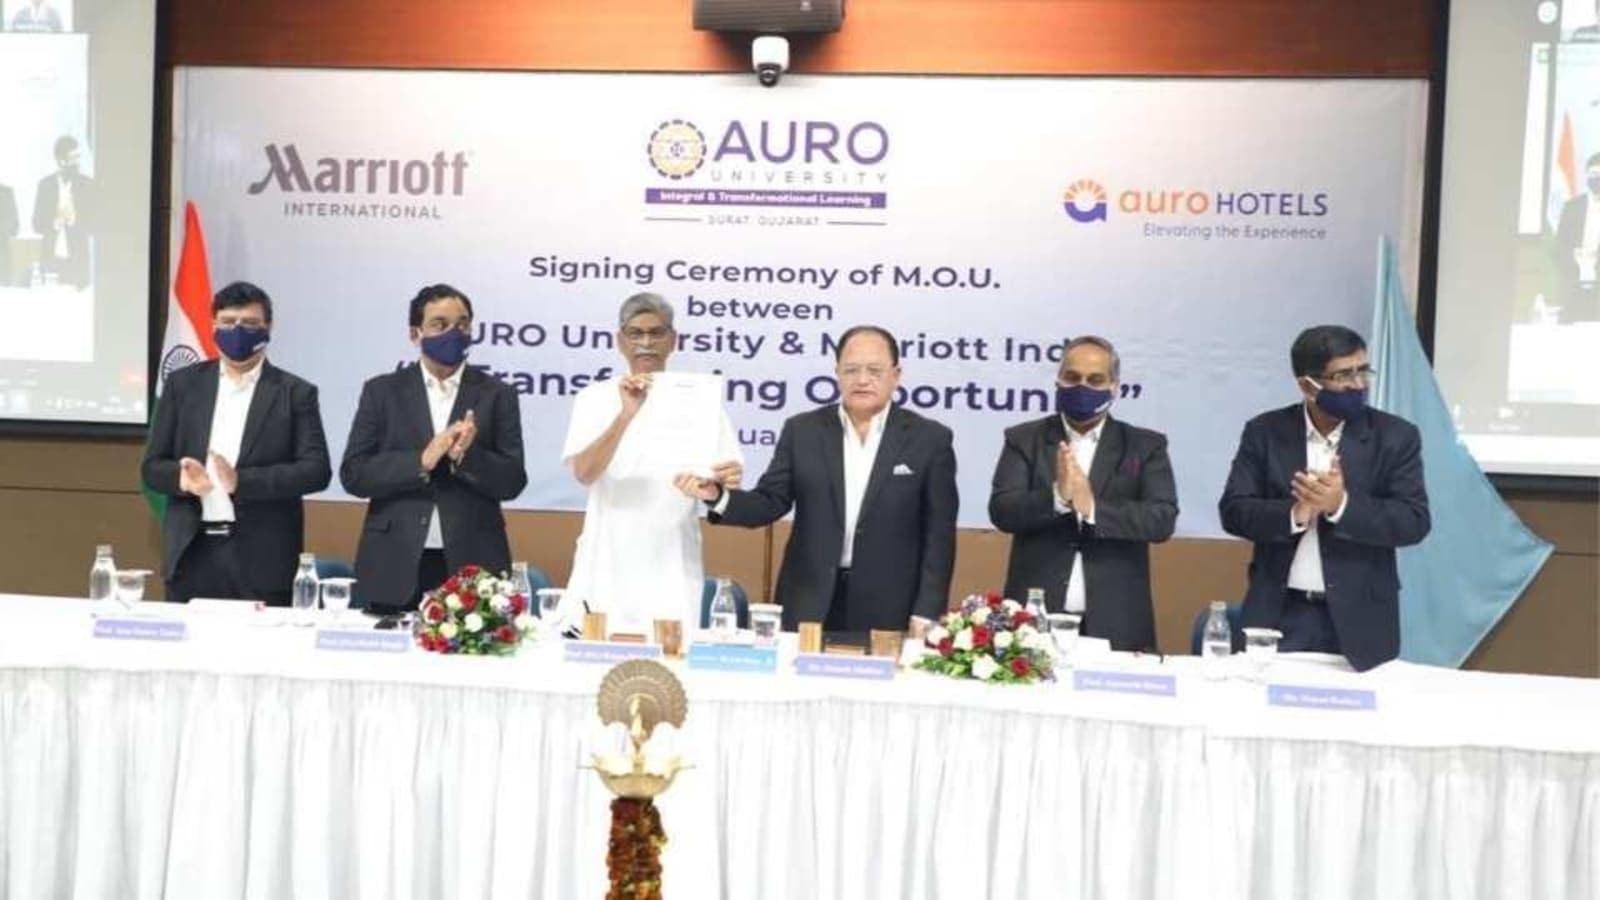 auro-university-collaborates-with-marriott-international-in-india-hindustan-times